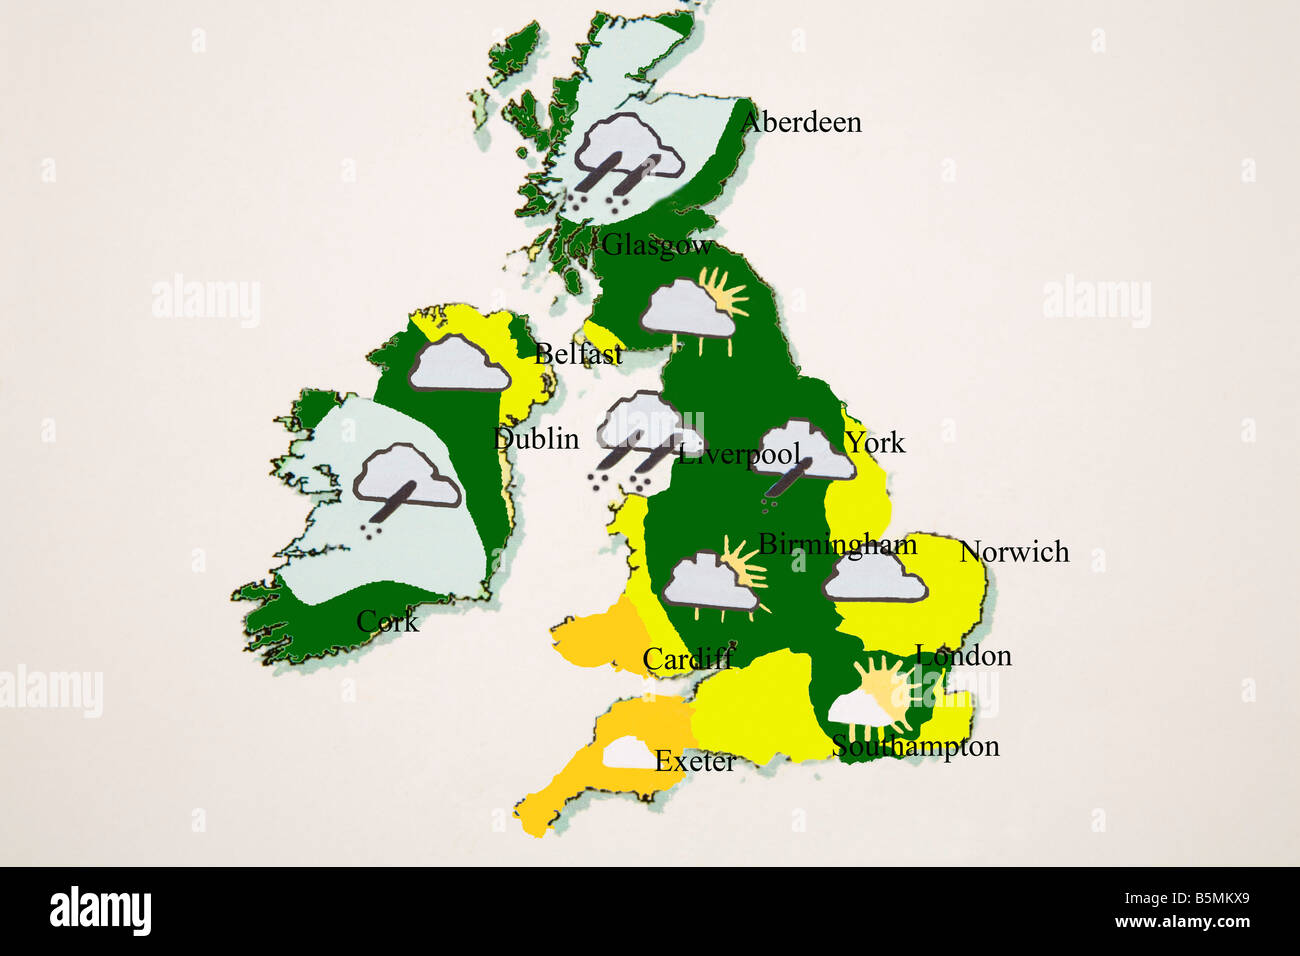 Studio UK weather map showing rain sun cloud in different areas Stock Photo